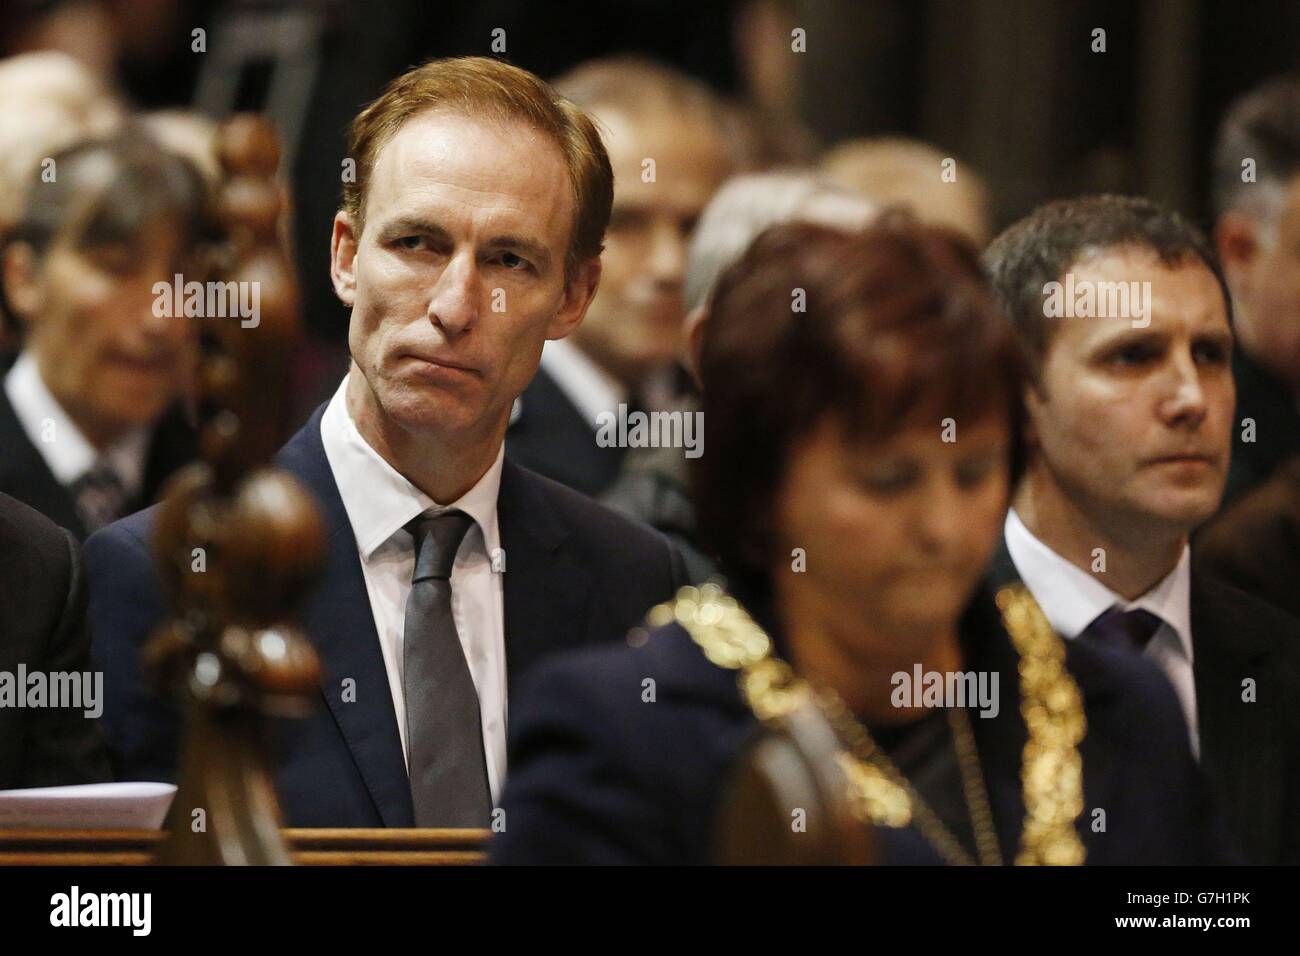 Jim Murphy MP during a service of remembrance at Glasgow Cathedral, commemorating the ten victims who lost their lives in the Clutha helicopter crash. Stock Photo